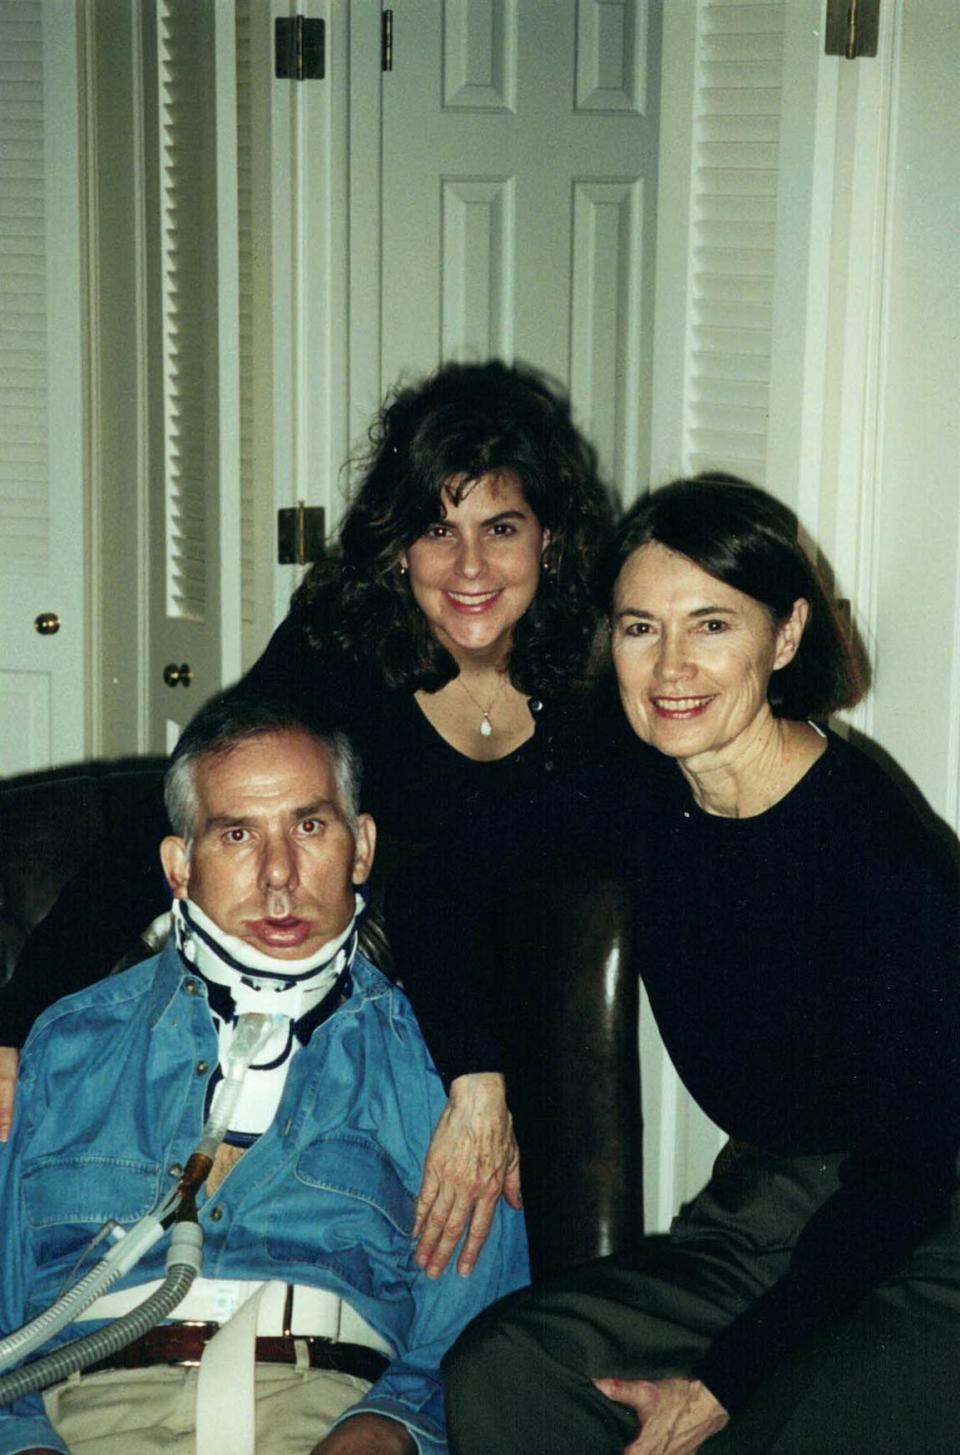 Gerry Gunnin, his niece Stacy Lindborg and wife Barbara Gunnin before Gerry's death from ALS in 2003. Lindborg is now executive vice president and head of global clinical research for Brainstorm Cell Therapeutics.